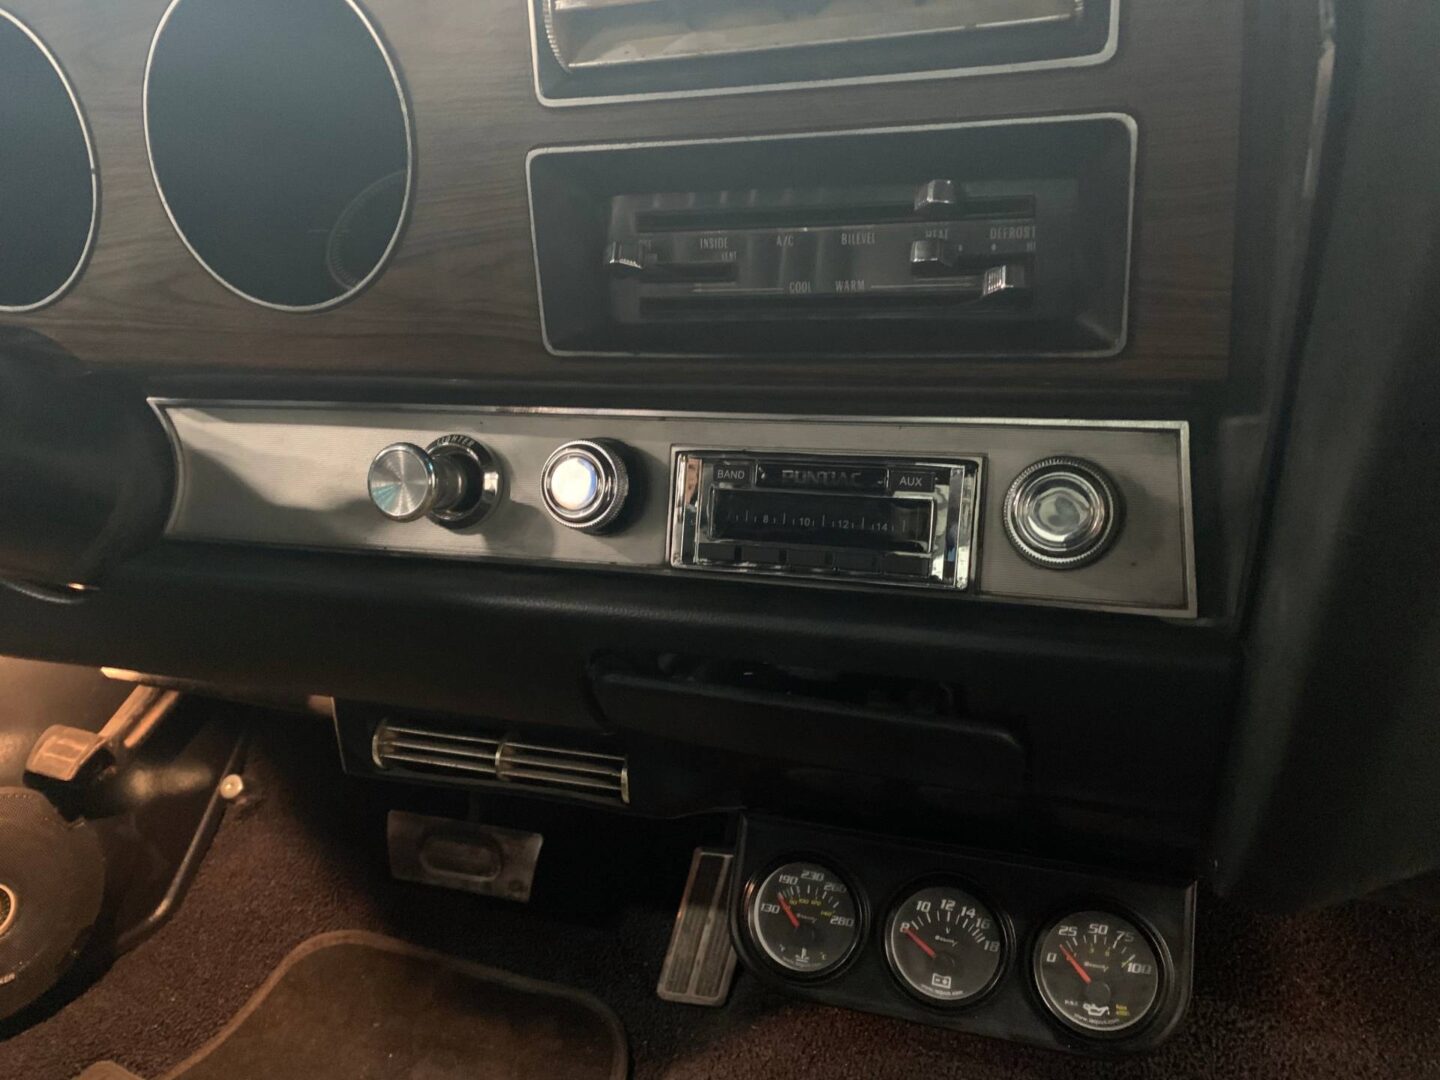 The stereo system and speed clock of a car